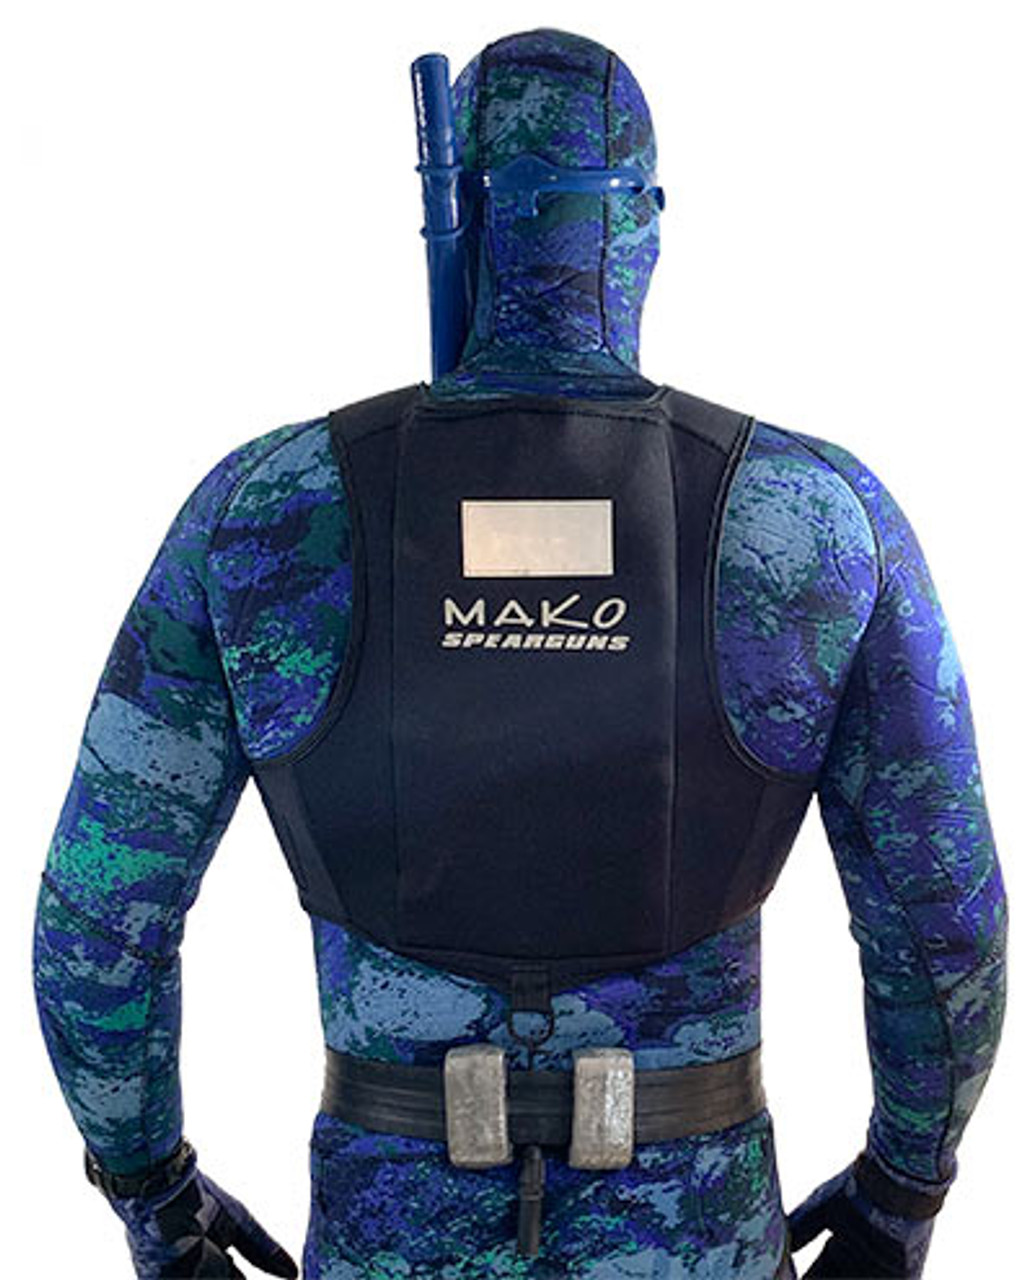 https://cdn11.bigcommerce.com/s-2buyus9w3z/images/stencil/1280x1280/products/254/1636/quick-release-weight-vest-back-with-weightbelt__49506.1673463923.jpg?c=1